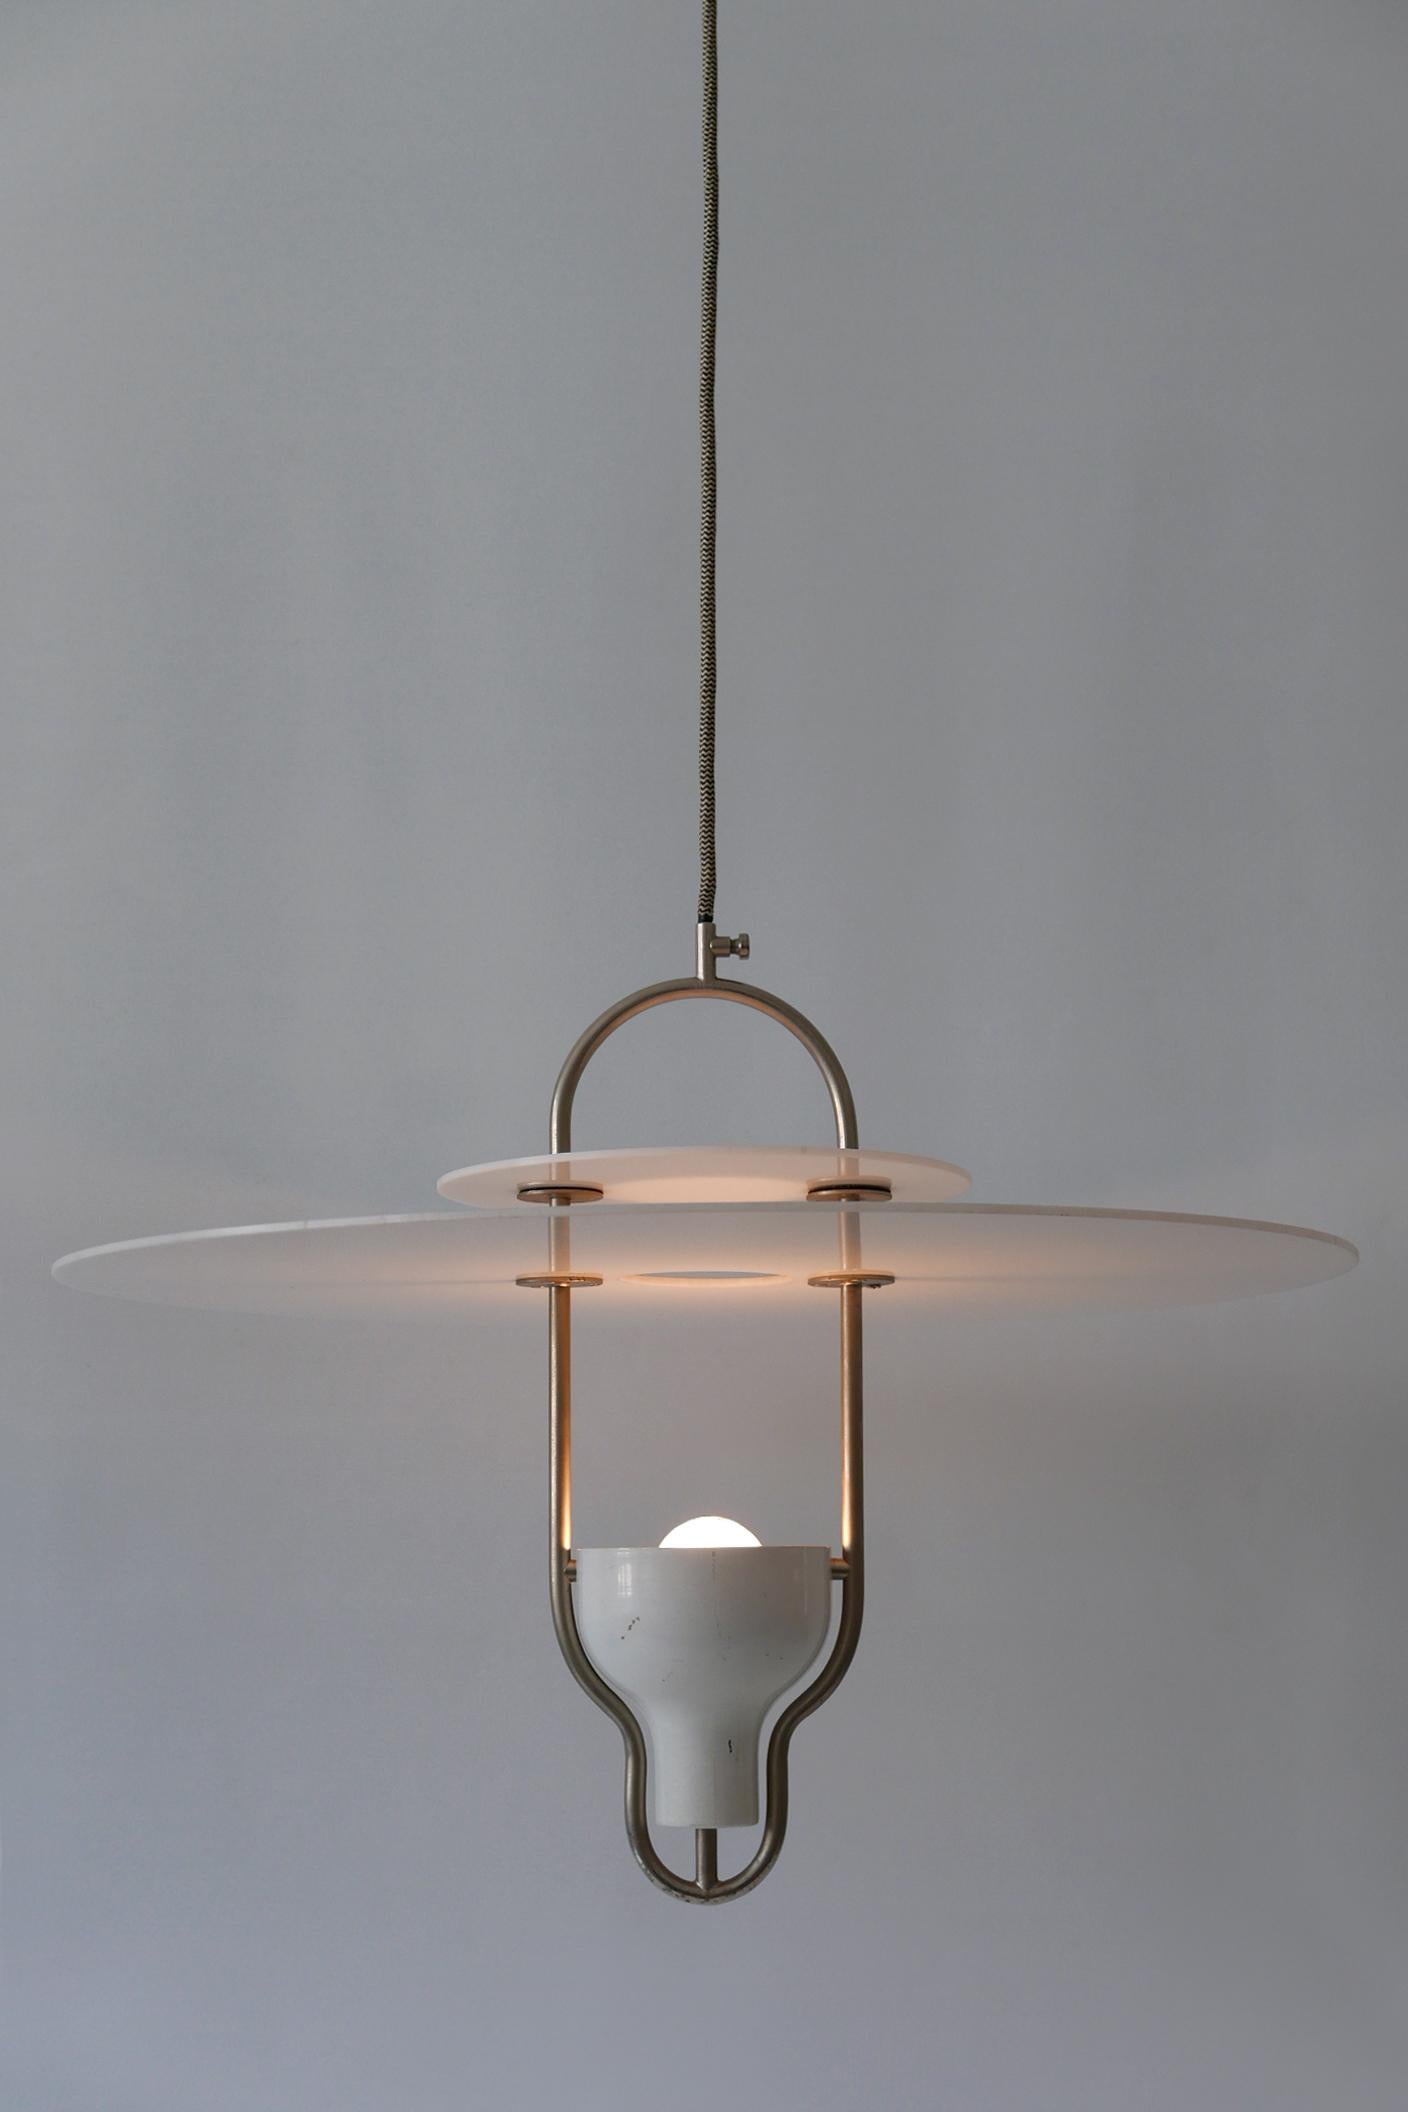 Exceptional Mid-Century Modern Ufo Pendant Lamp, Italy, 1960s For Sale 3